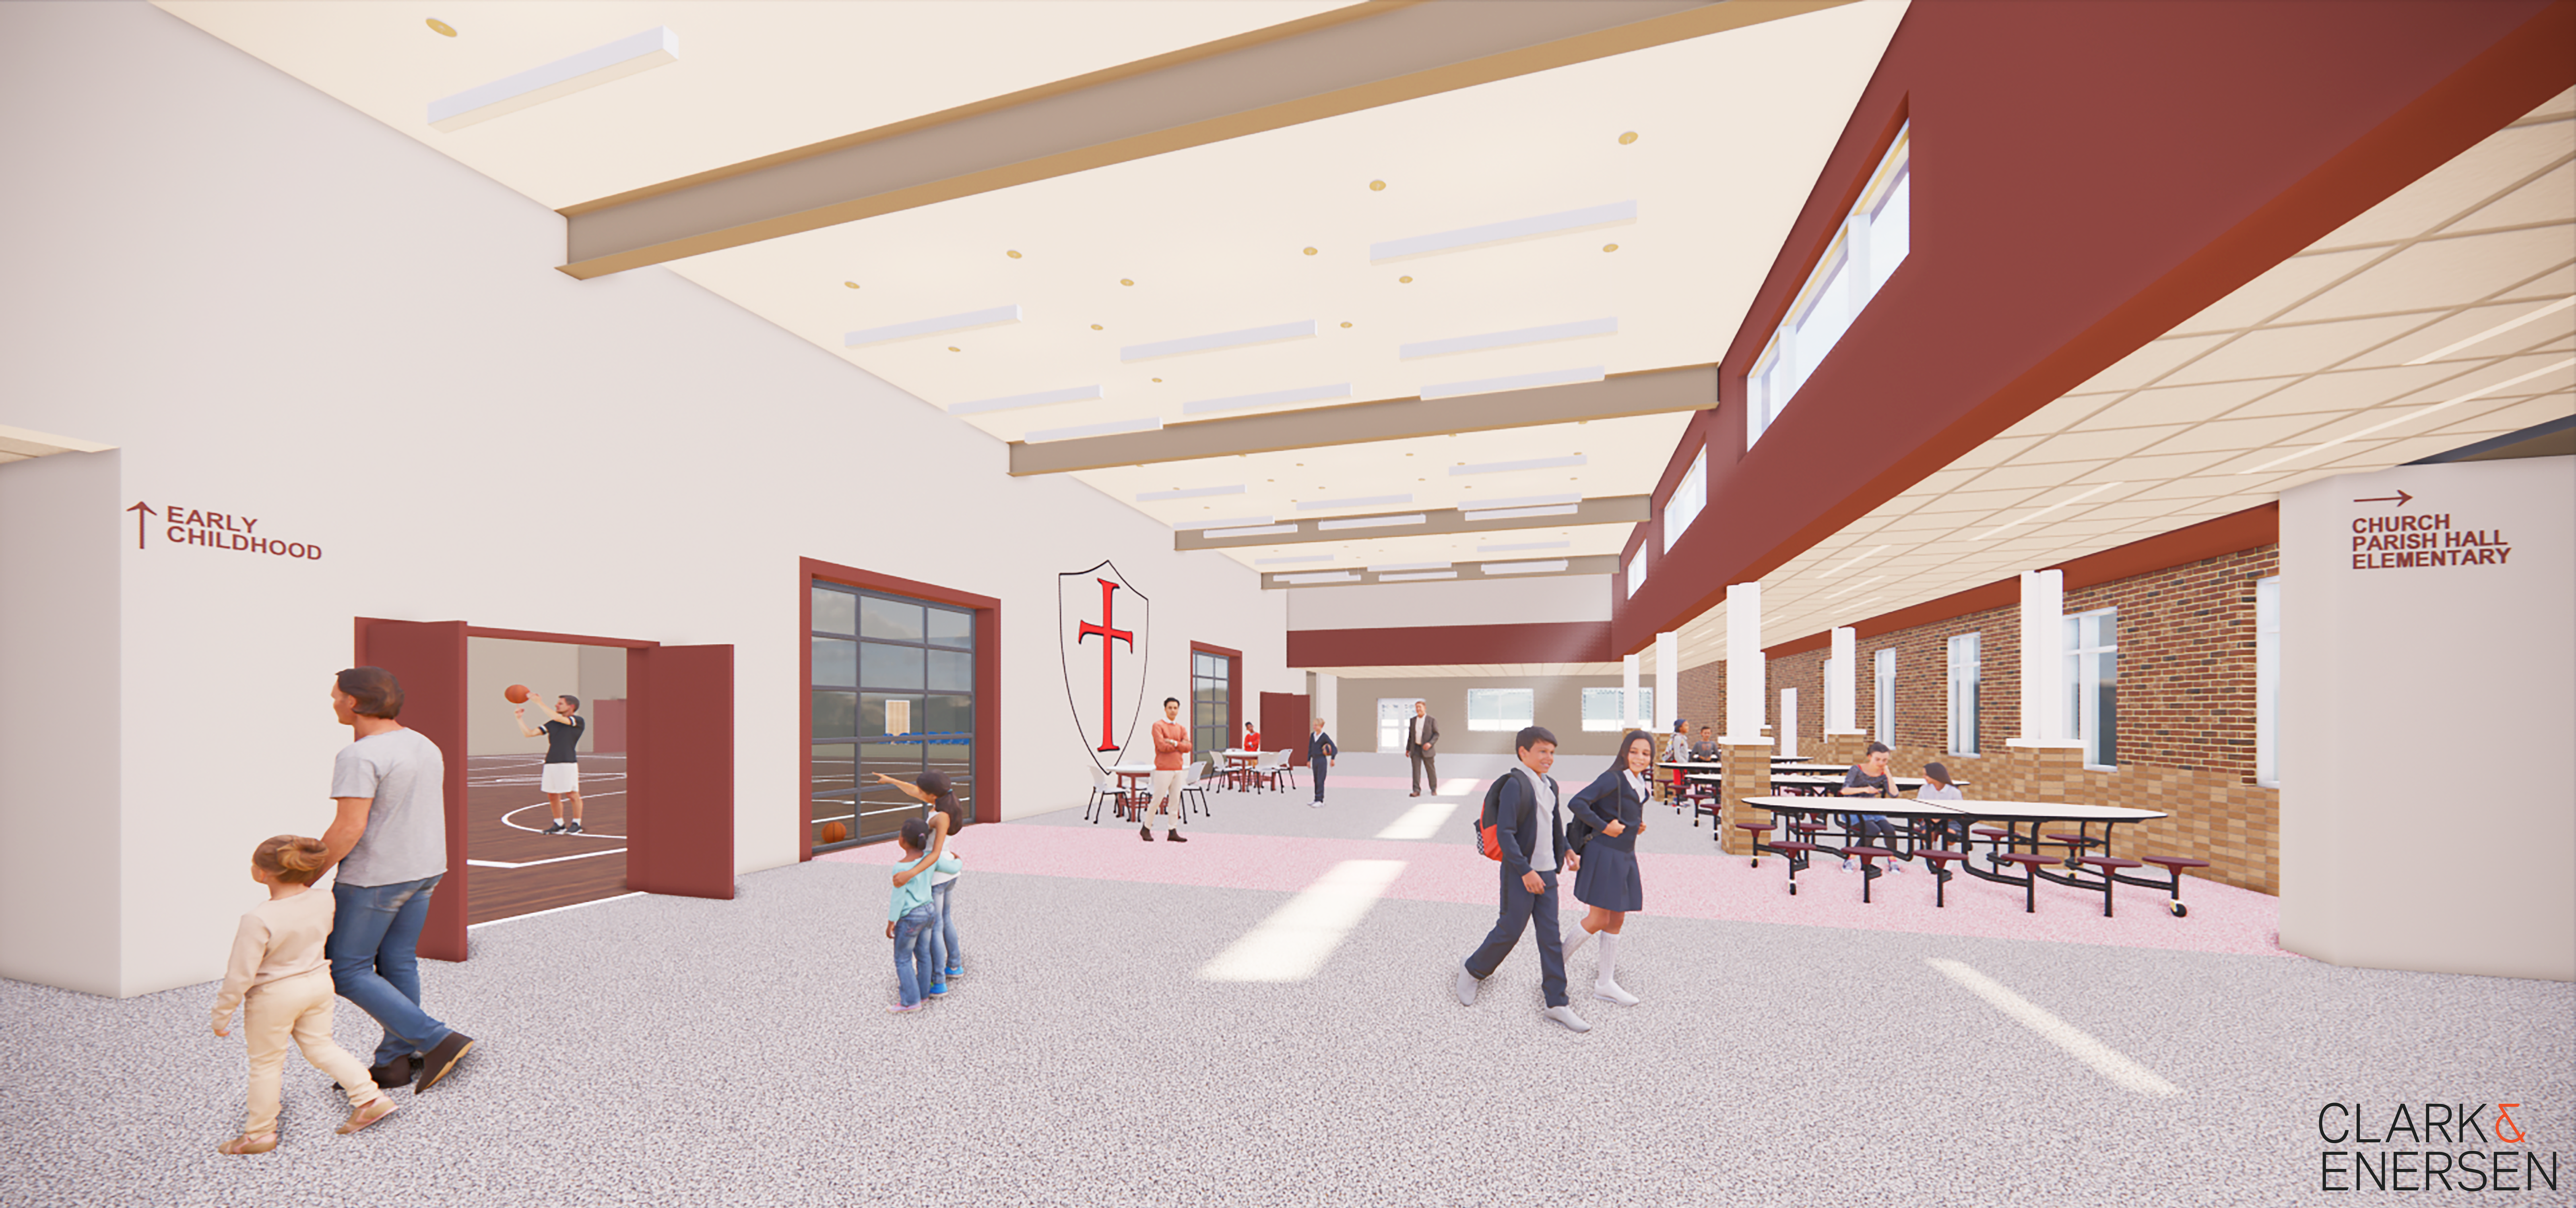 New Commons area